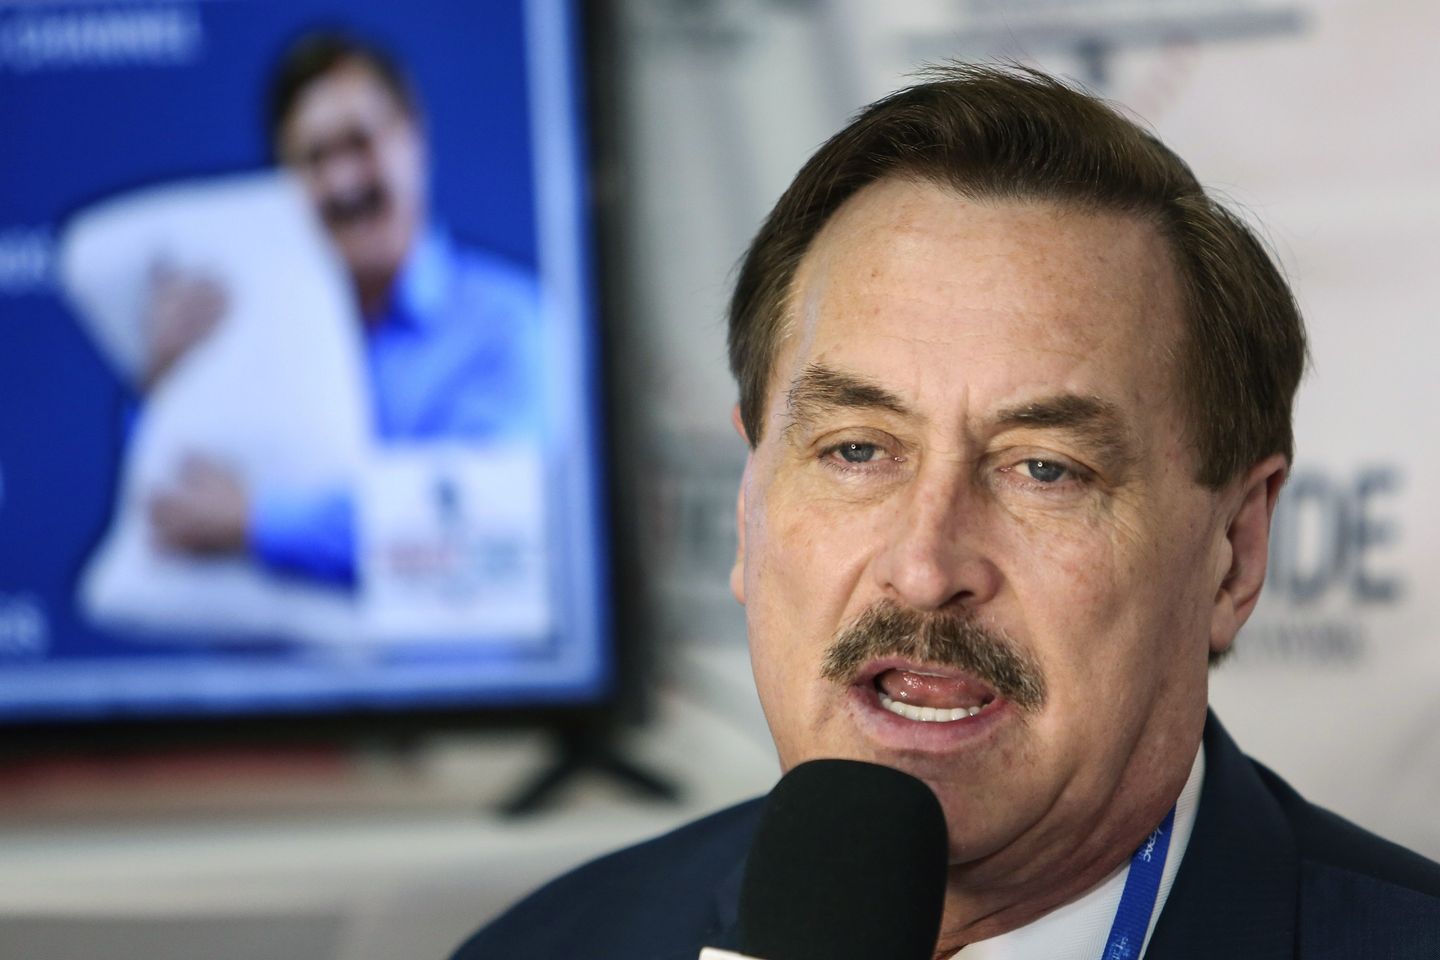 Idaho officials say Mike Lindell should foot the bill for 2020 election witch hunt